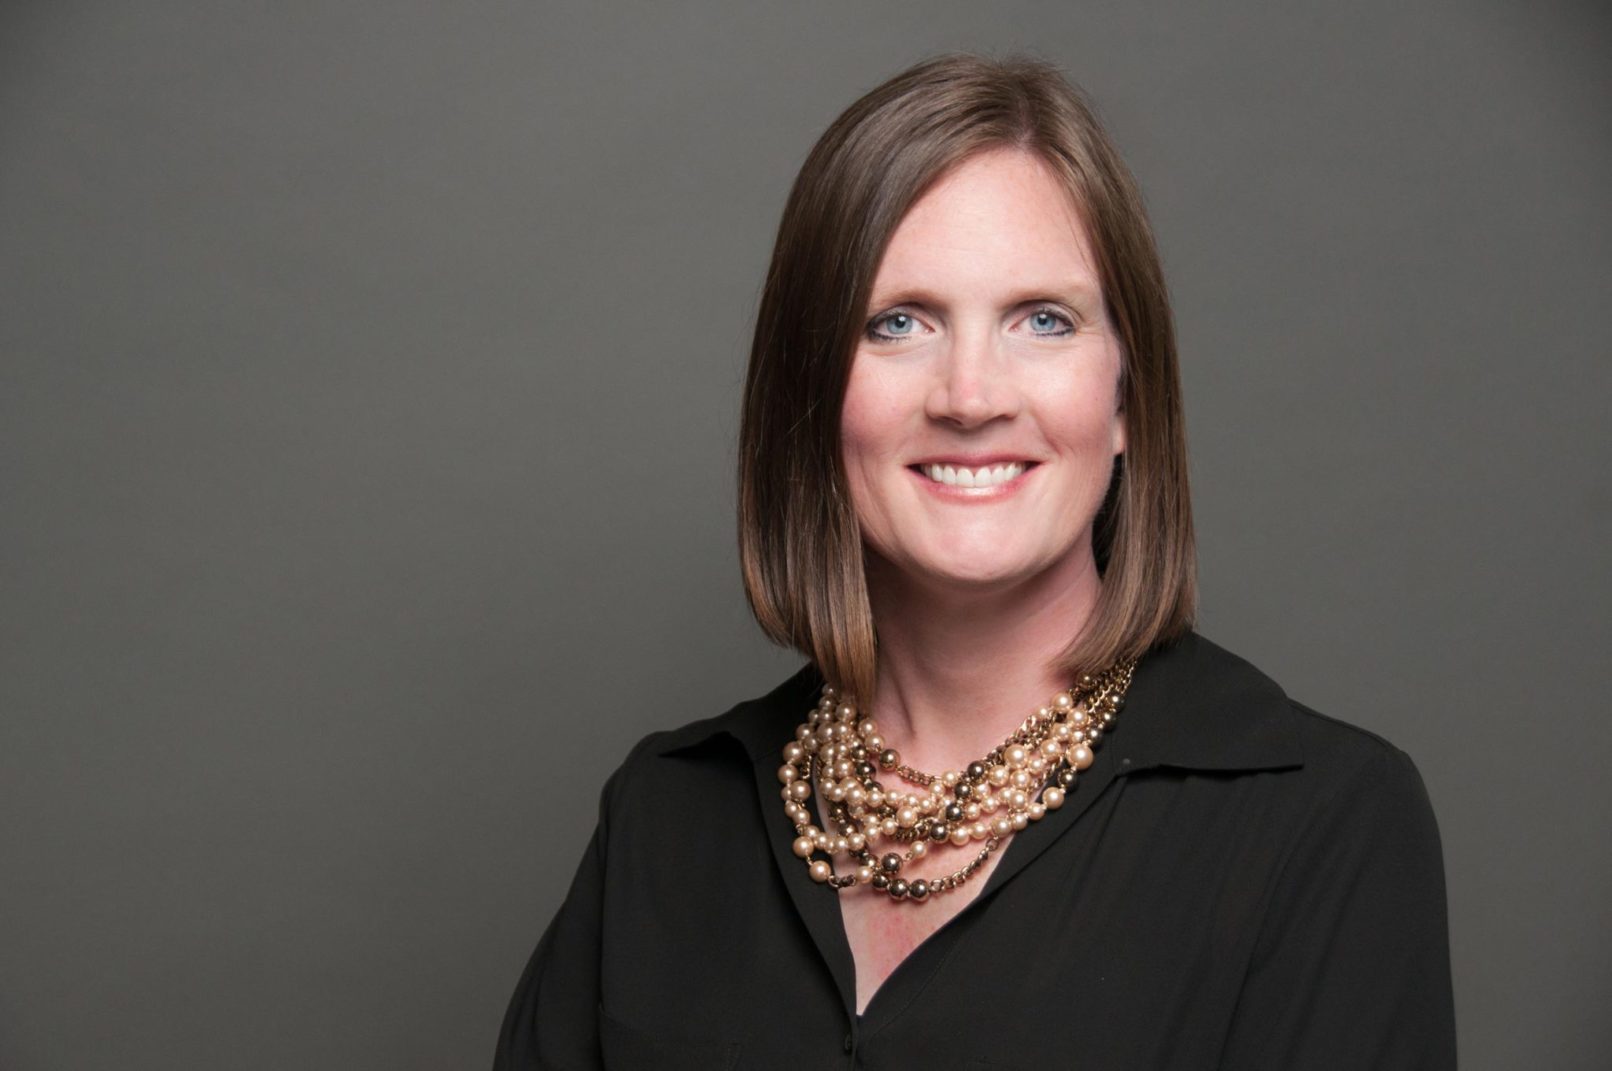 business headshot of a female executive coach with a pearl necklace and black top.